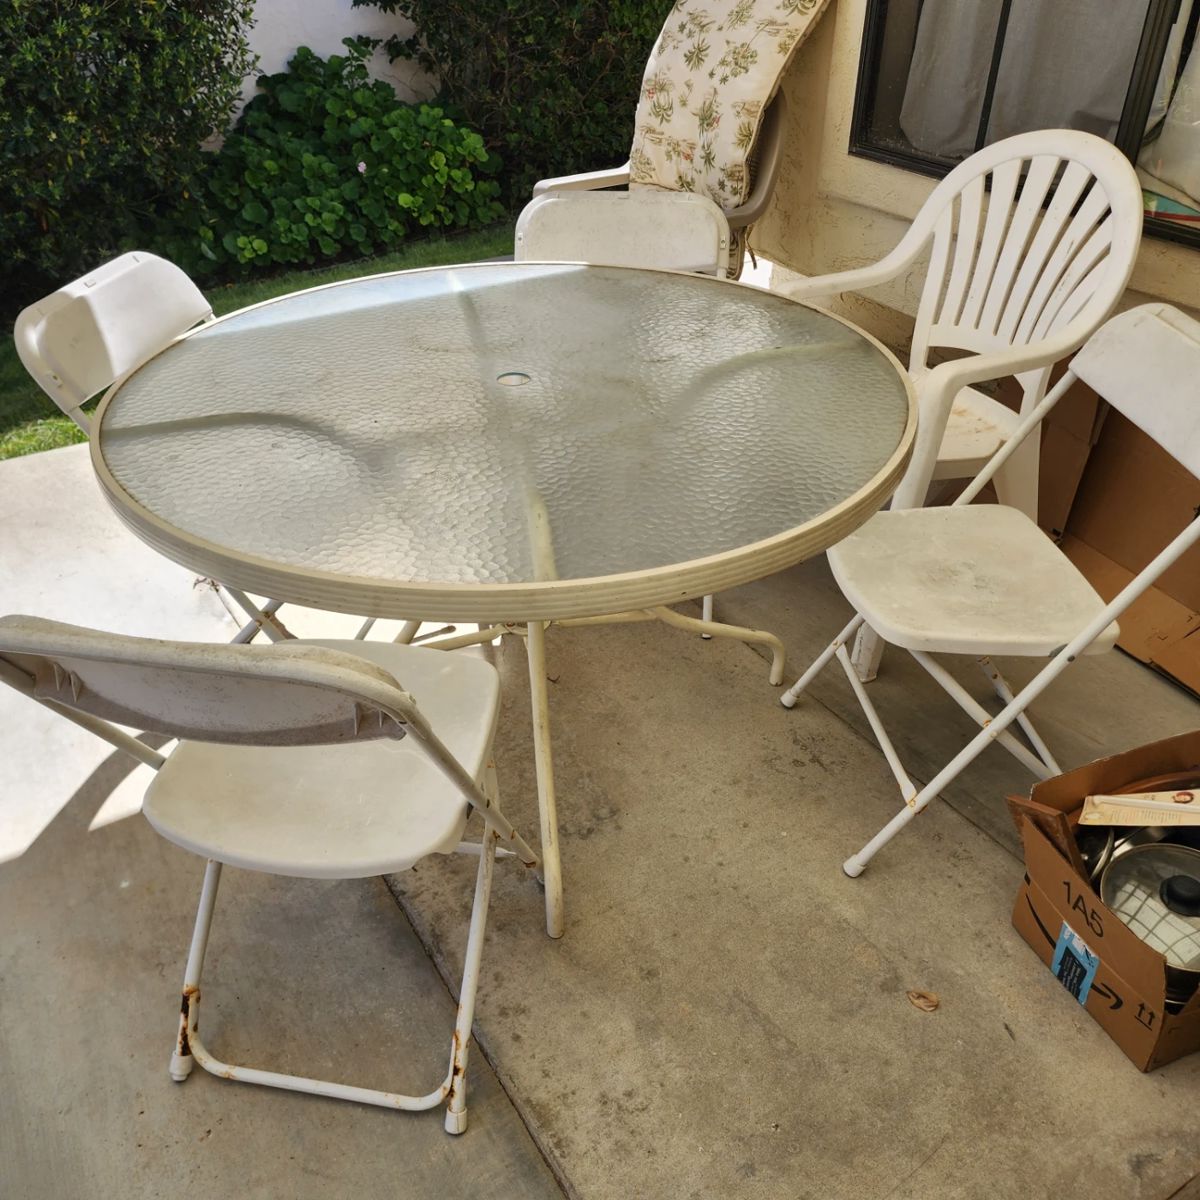 Great patio set with 4 folding chairs